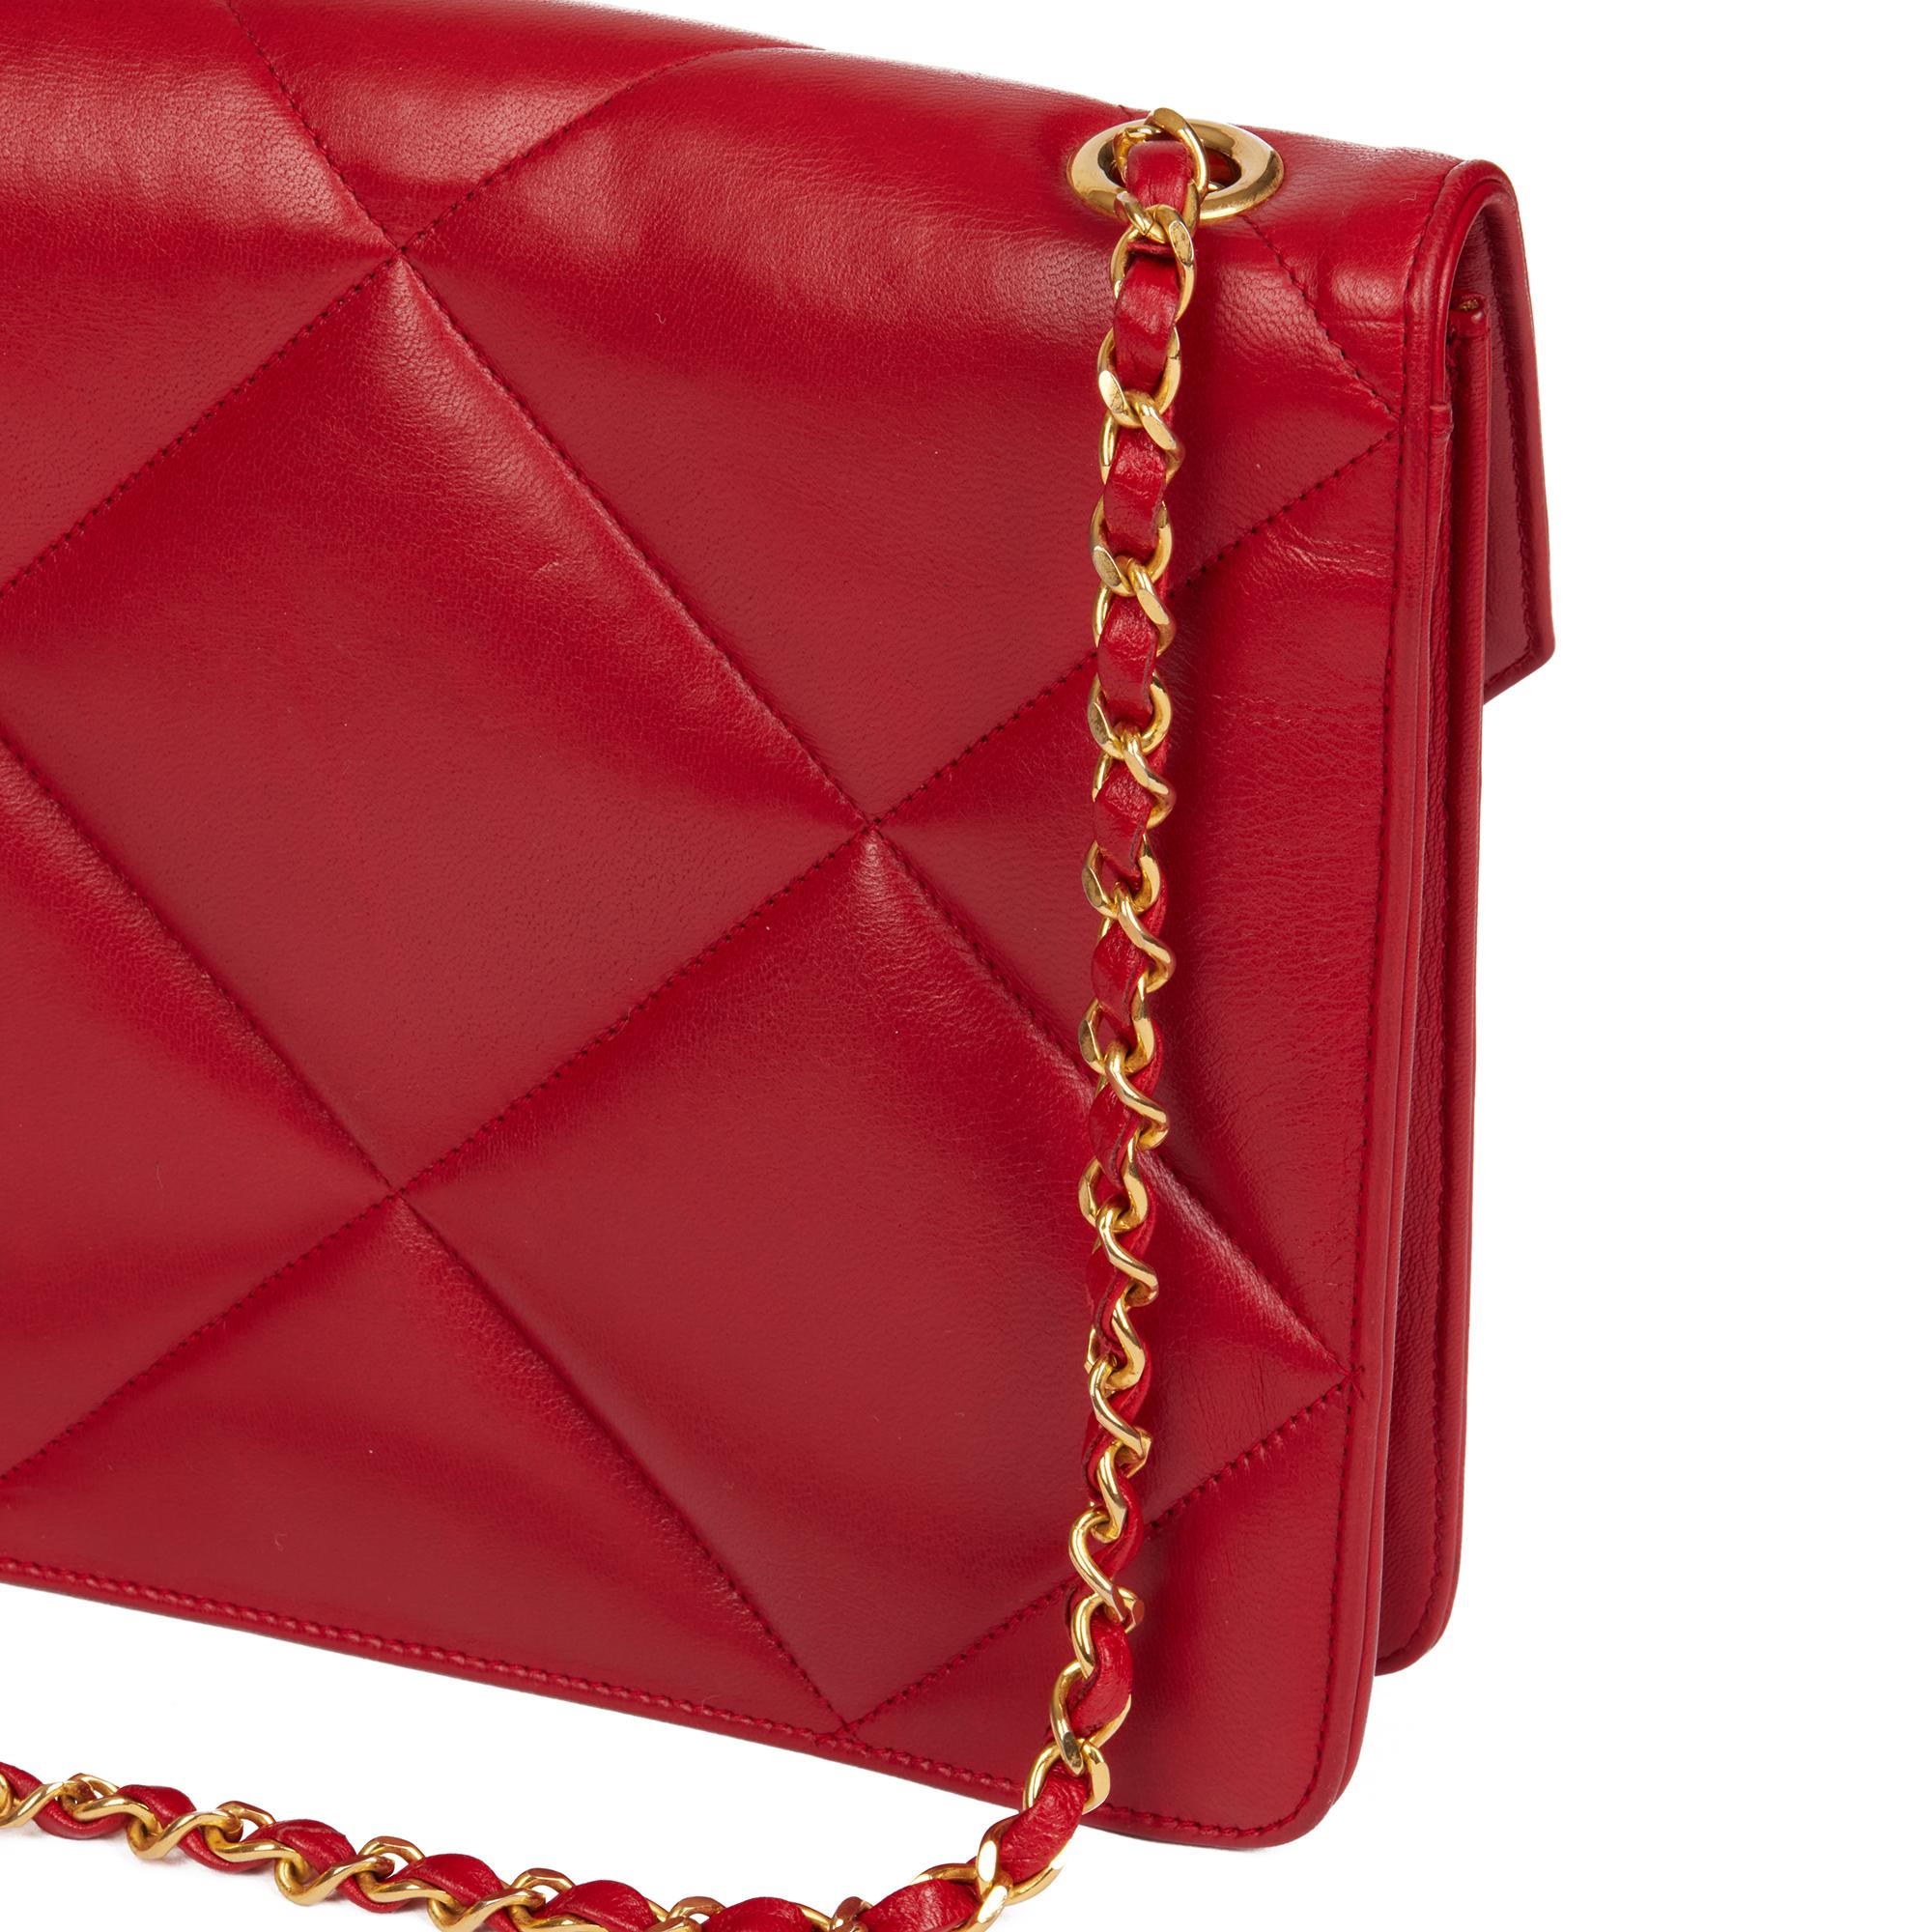 CHANEL Red Quilted Lambskin Vintage Classic Single Flap Bag 3